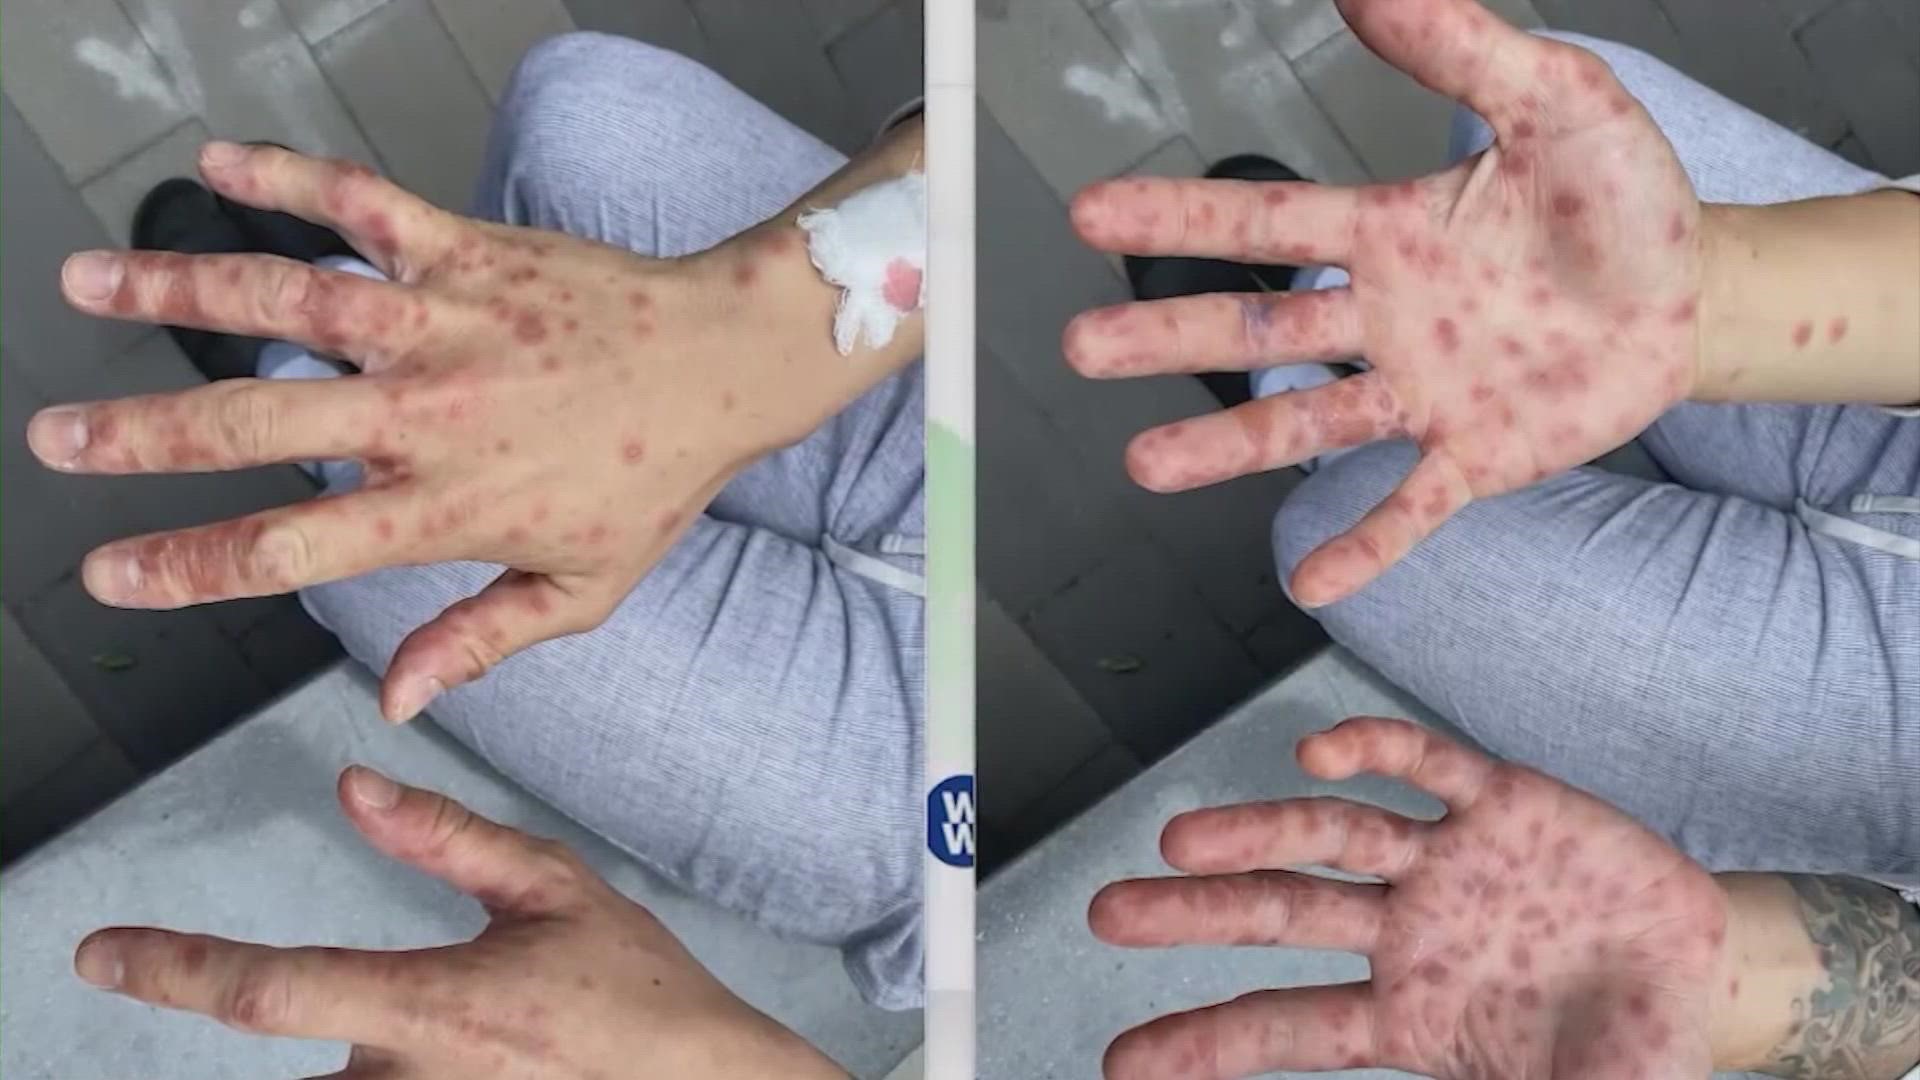 The disease, which can cause a serious skin rash, appears to be spreading largely via direct contact with the skin or saliva of an infected person.